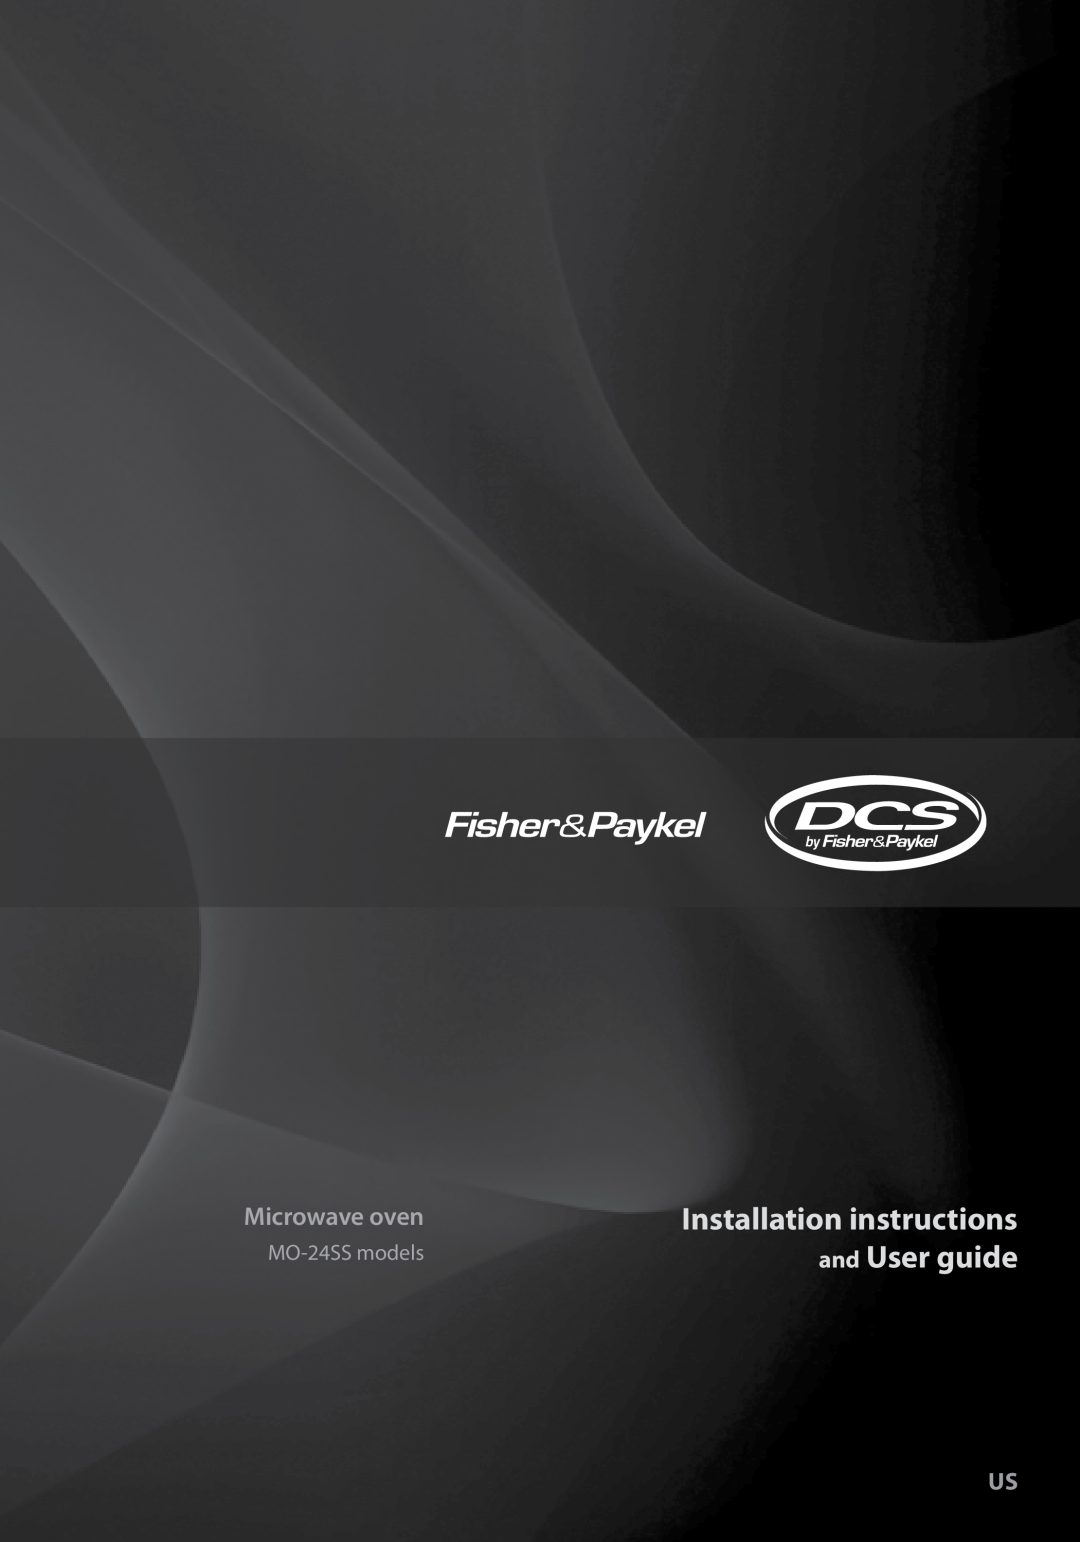 Fisher & Paykel installation instructions and User guide, Installation instructions, MO-24SS models, Microwave oven 